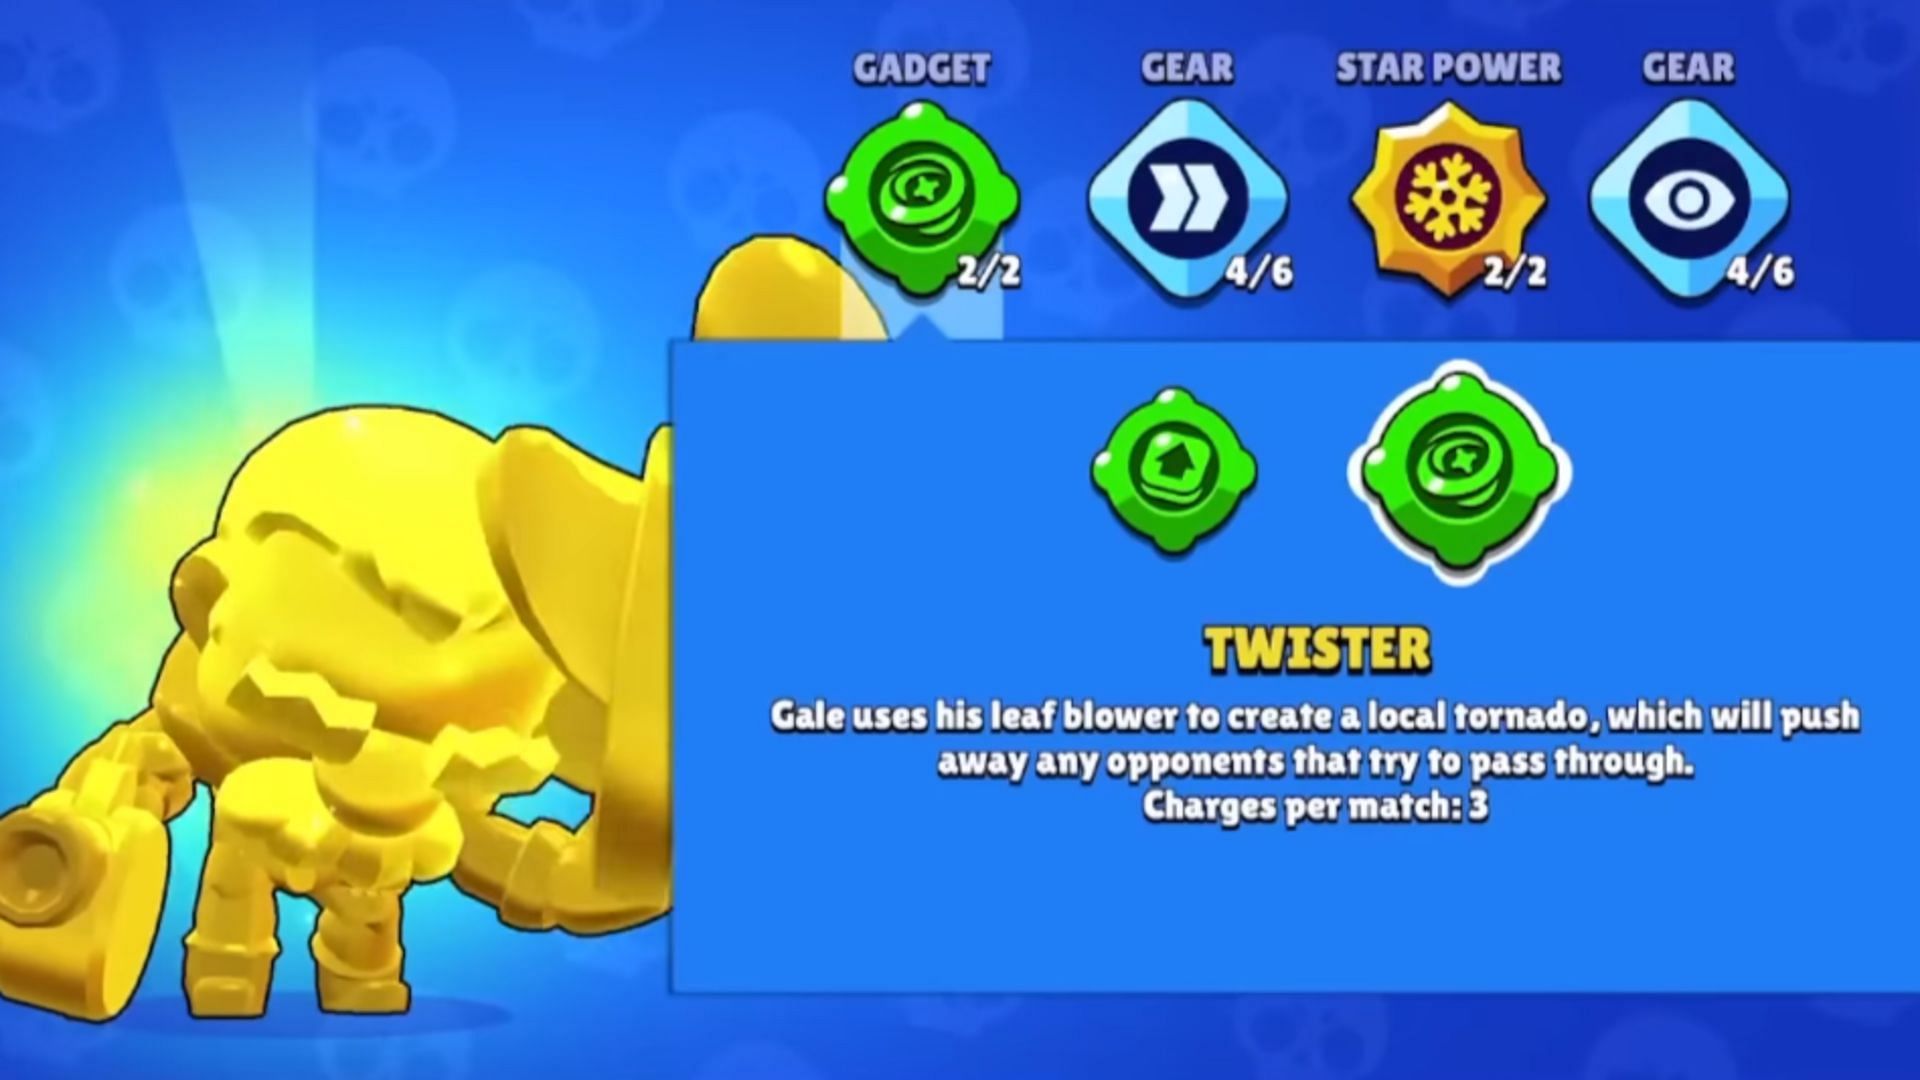 Twister Gadget (Image via Supercell)